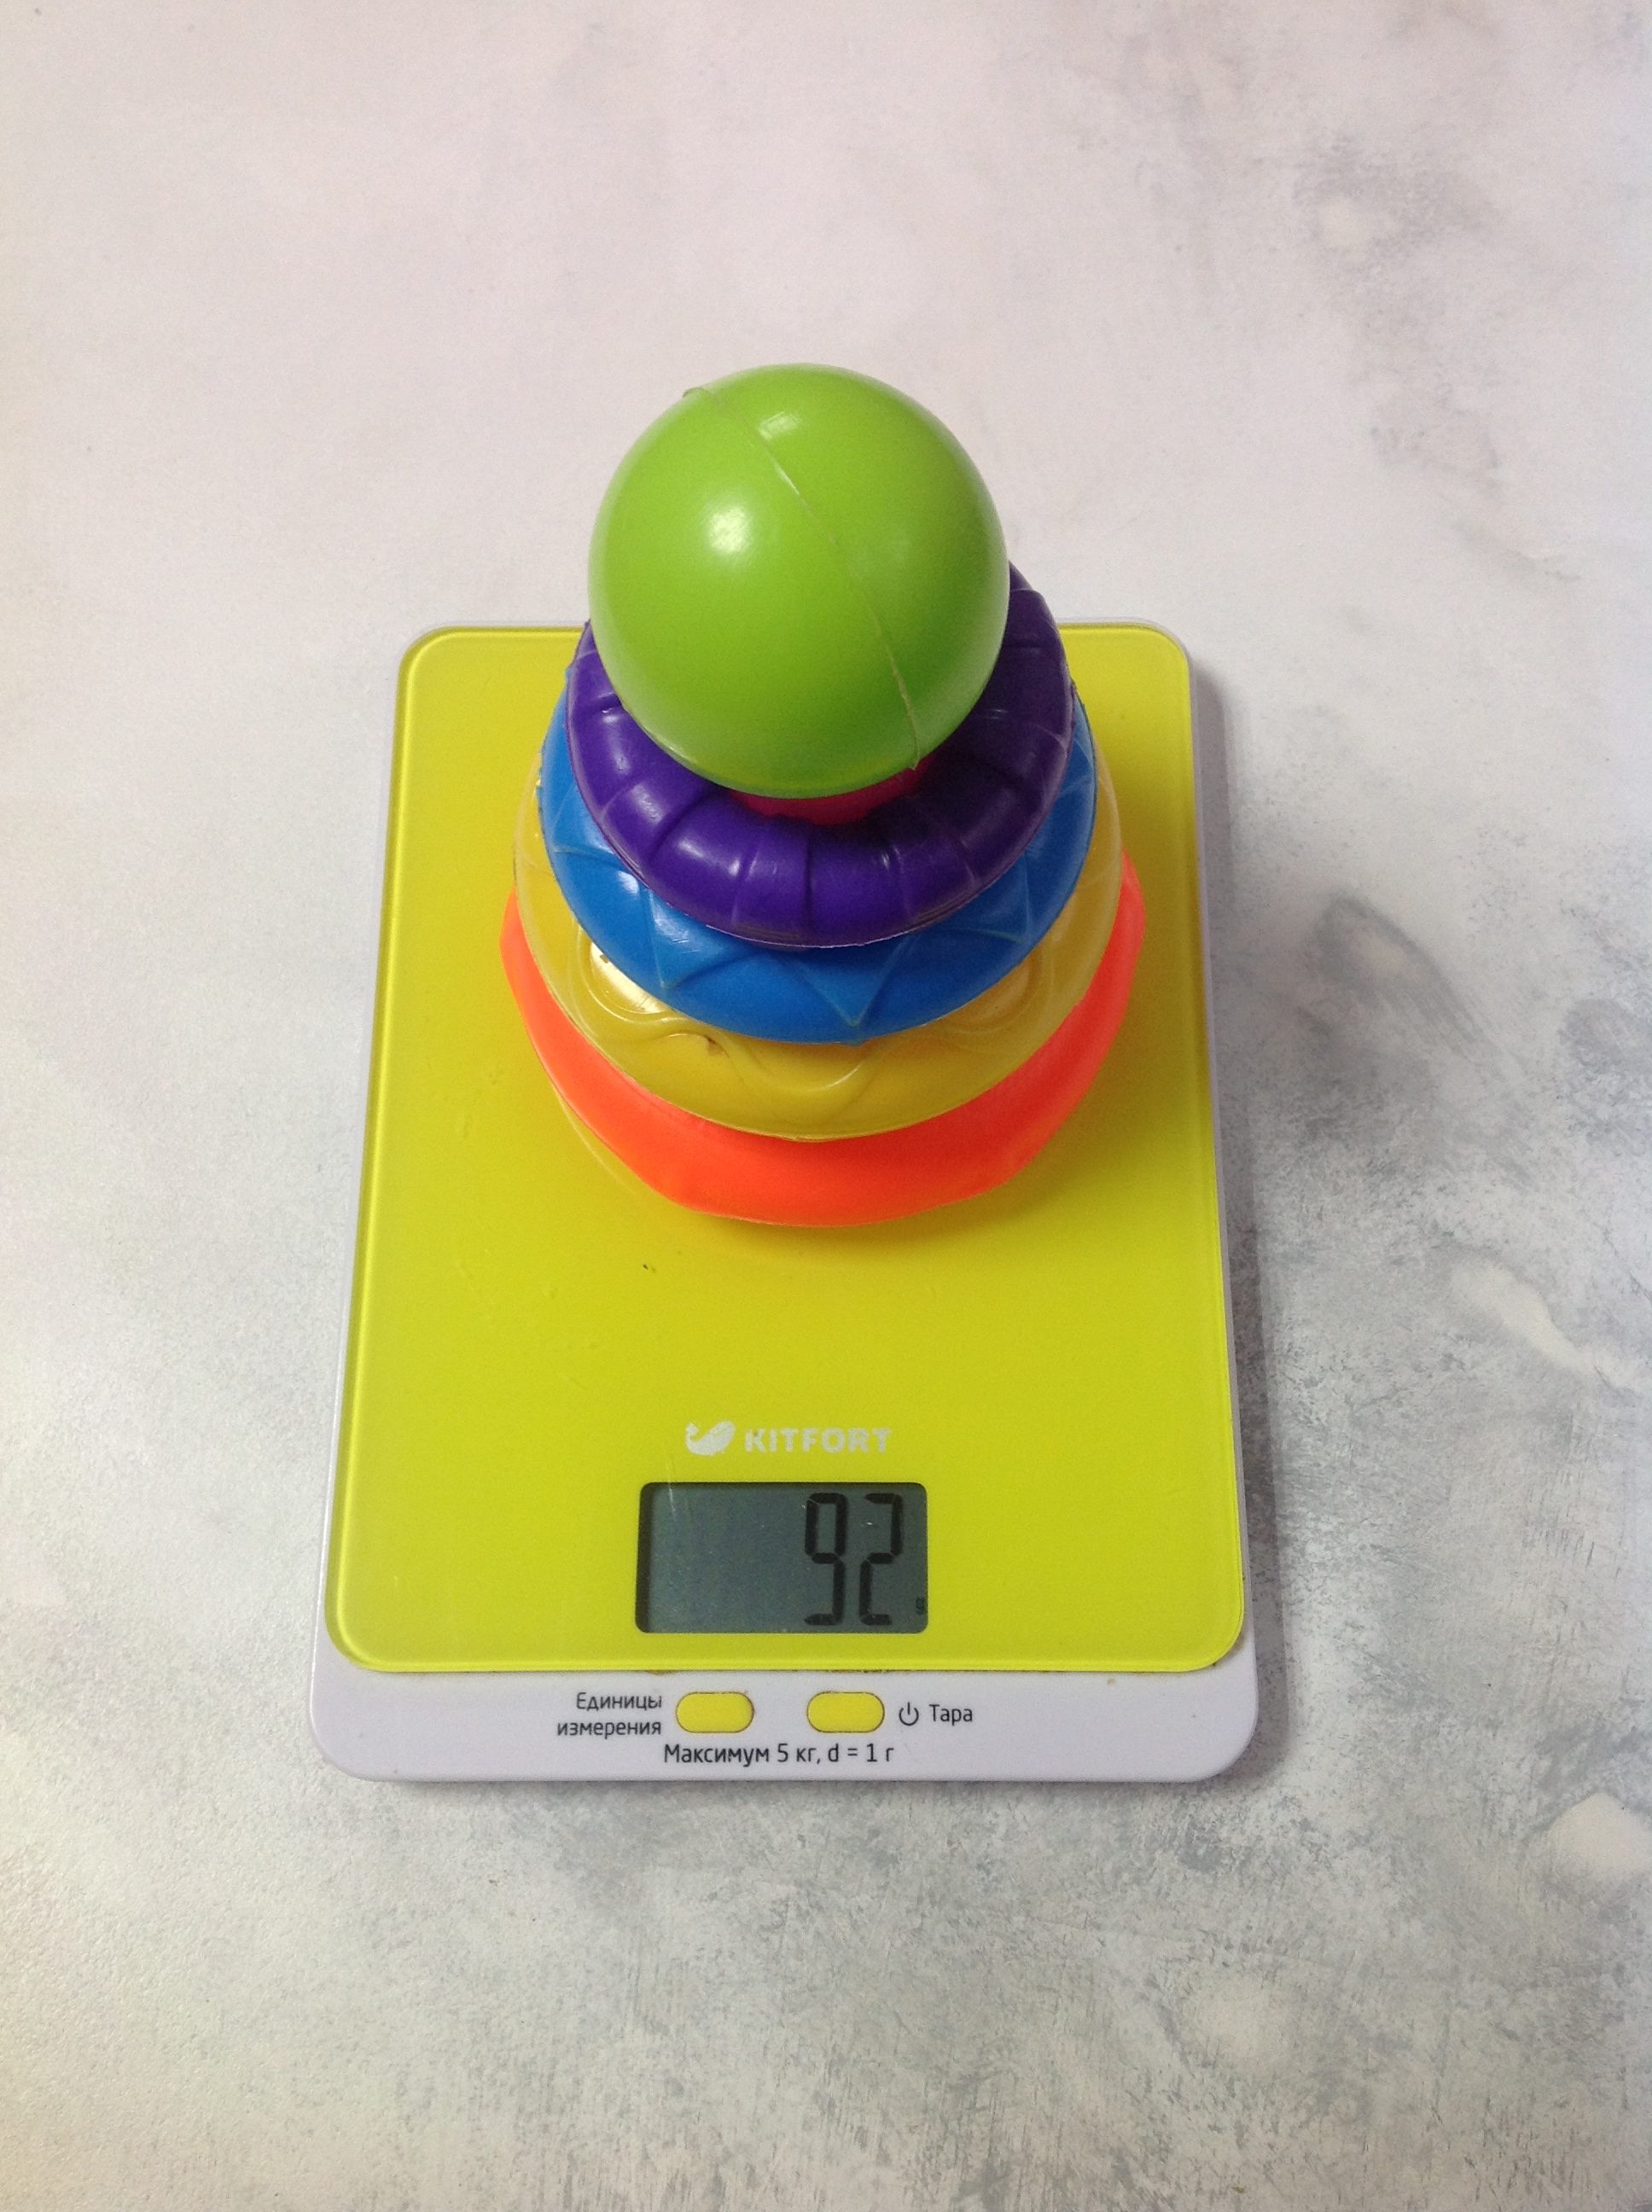 How much does a plastic pyramid children's toy weigh?